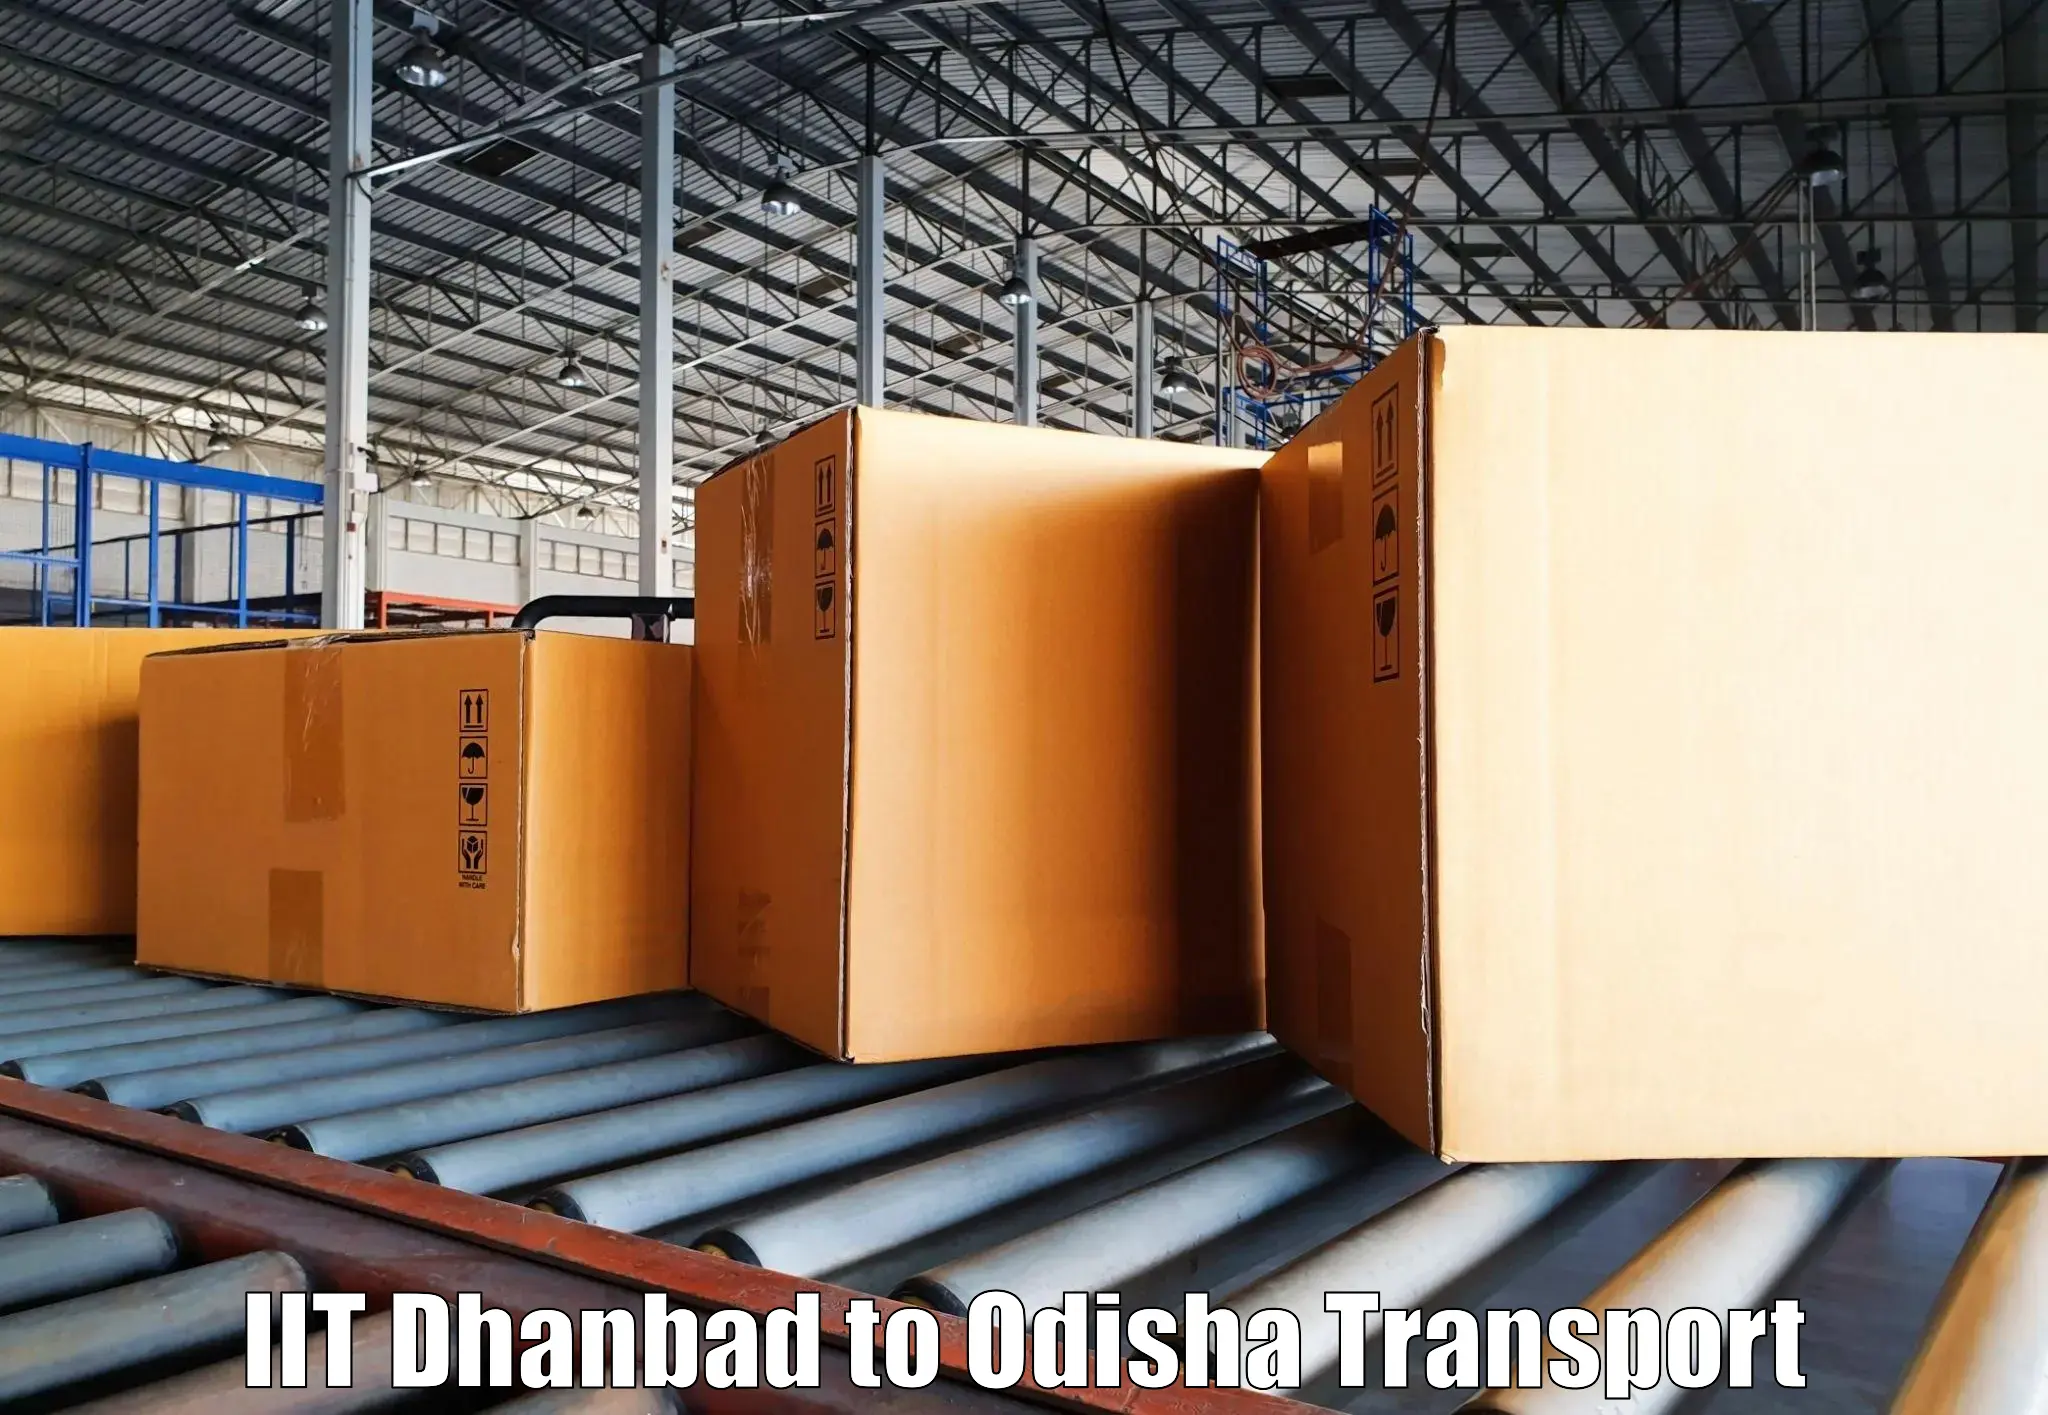 Nearby transport service IIT Dhanbad to Muribahal